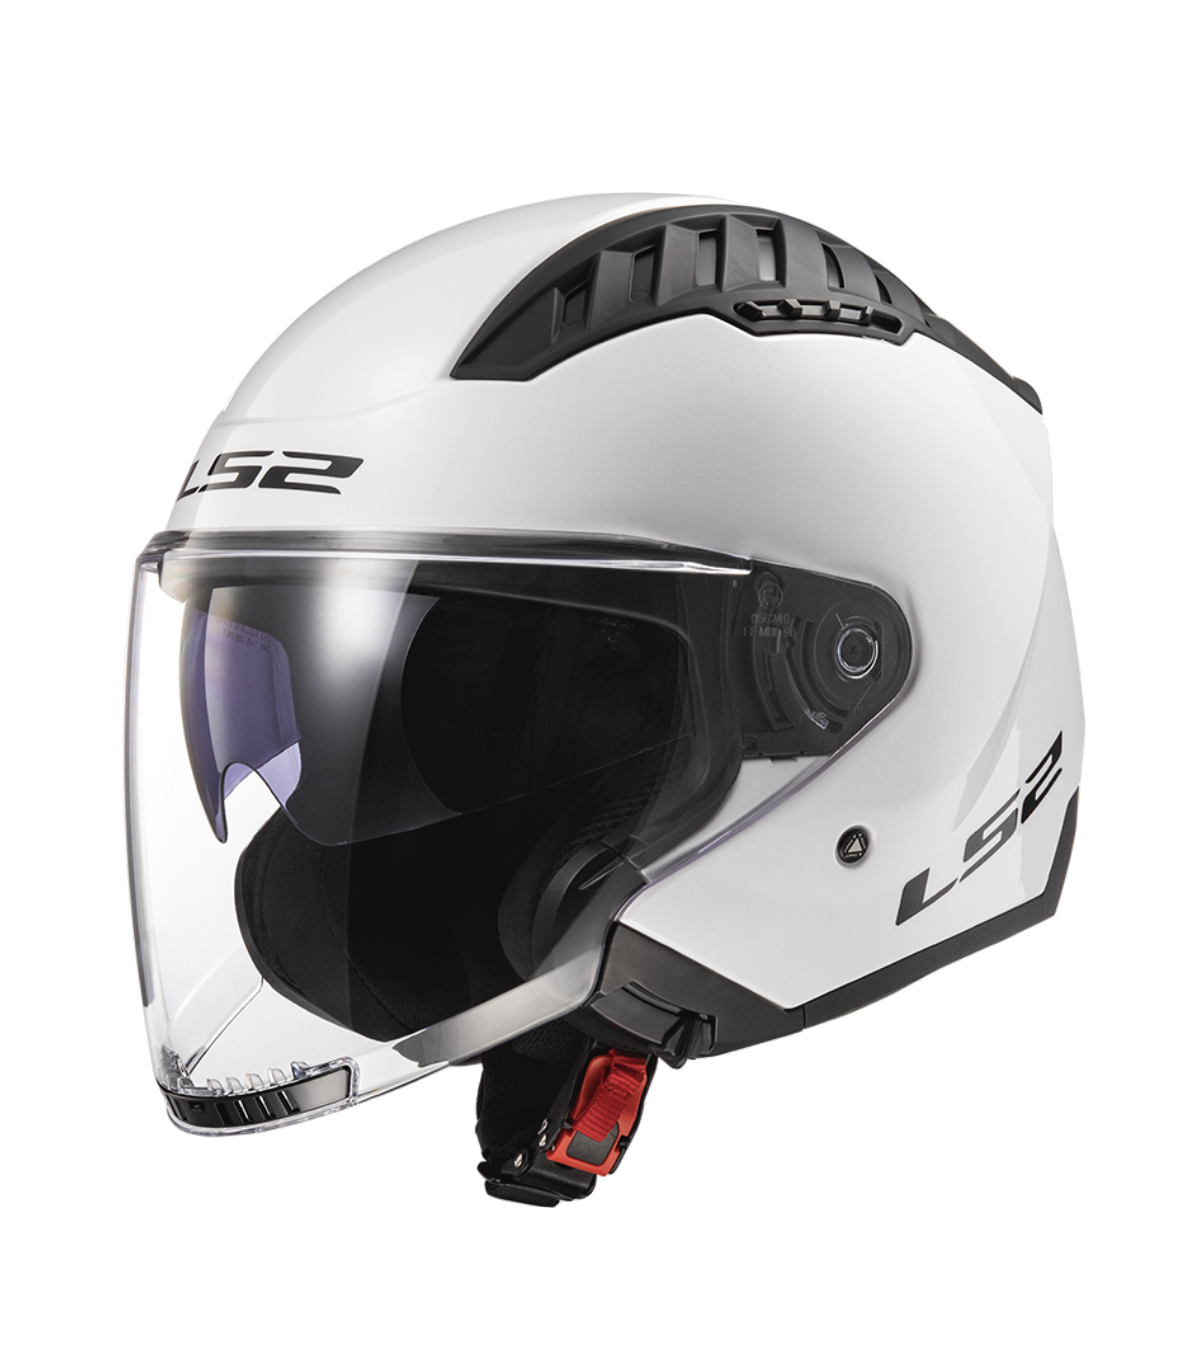 Casco Jet LS2 Copter OF600 Solid Bianco Lucido